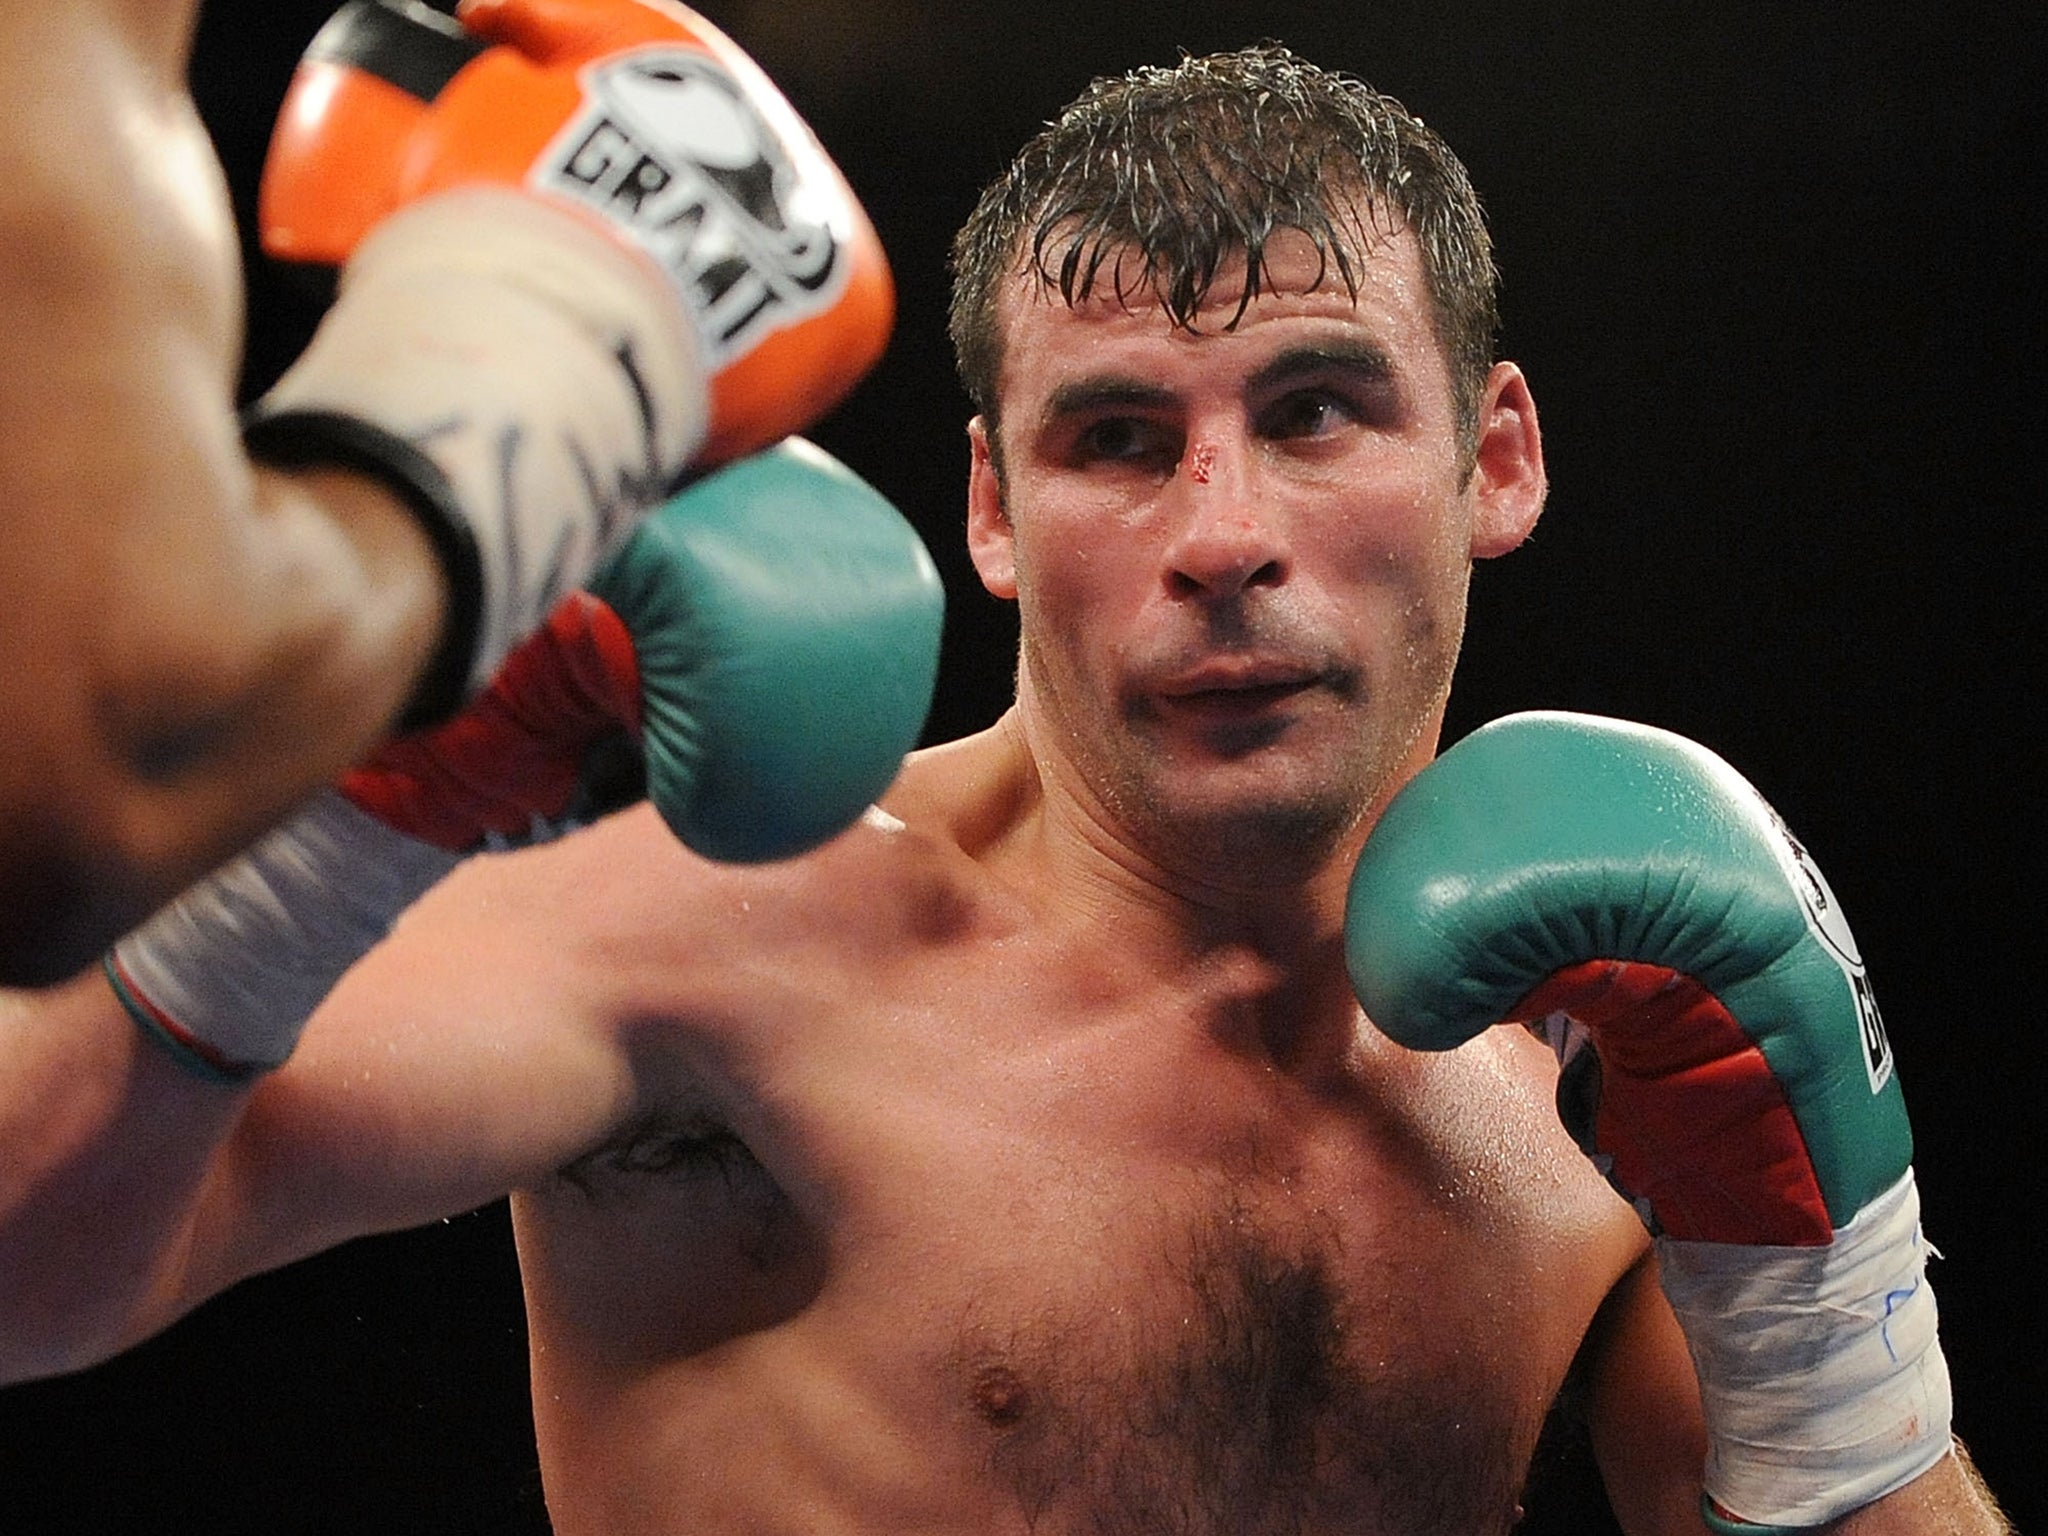 Joe Calzaghe met the Wales squad at their hotel and said he always saw himself as the underdog